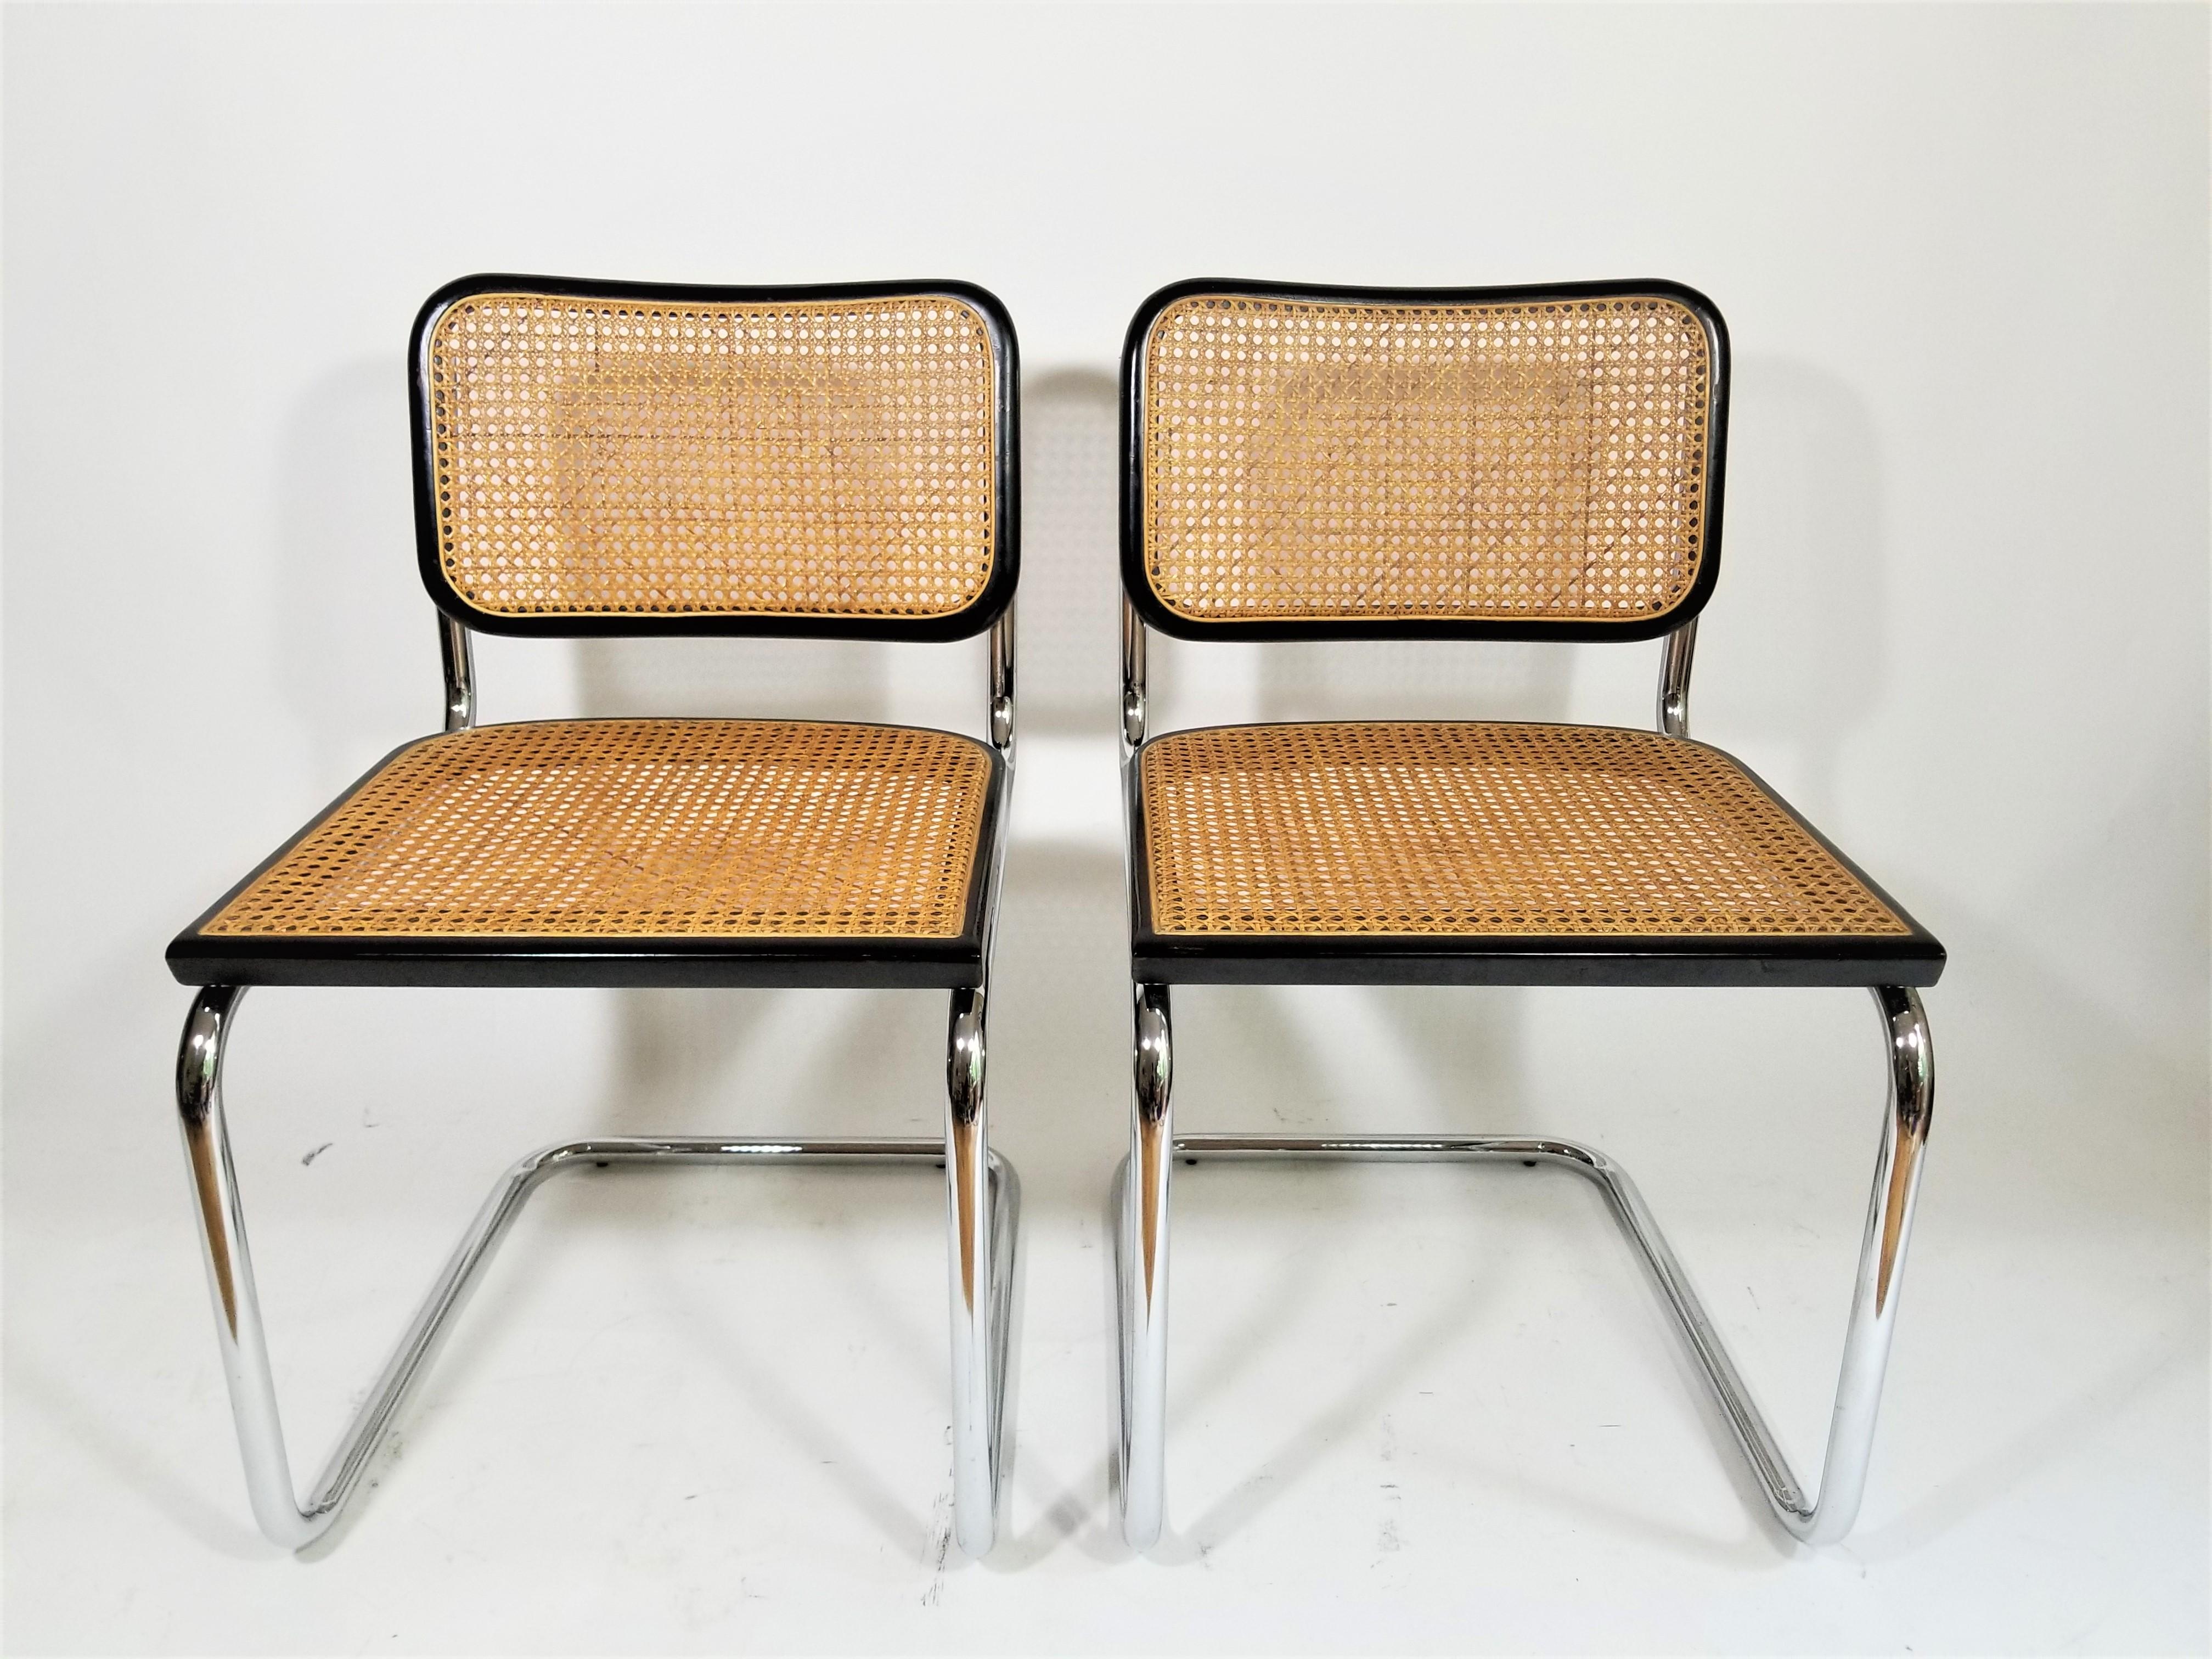 Pair of midcentury Marcel Breuer Cesca side chairs. Black finish. Cane backs and seats. Classic tubular cantilever chrome frame. We polish all chrome,
Made in Italy.
Measurements:
Height 32.5 inches
Seat height 18.5 inches
Width 18.5